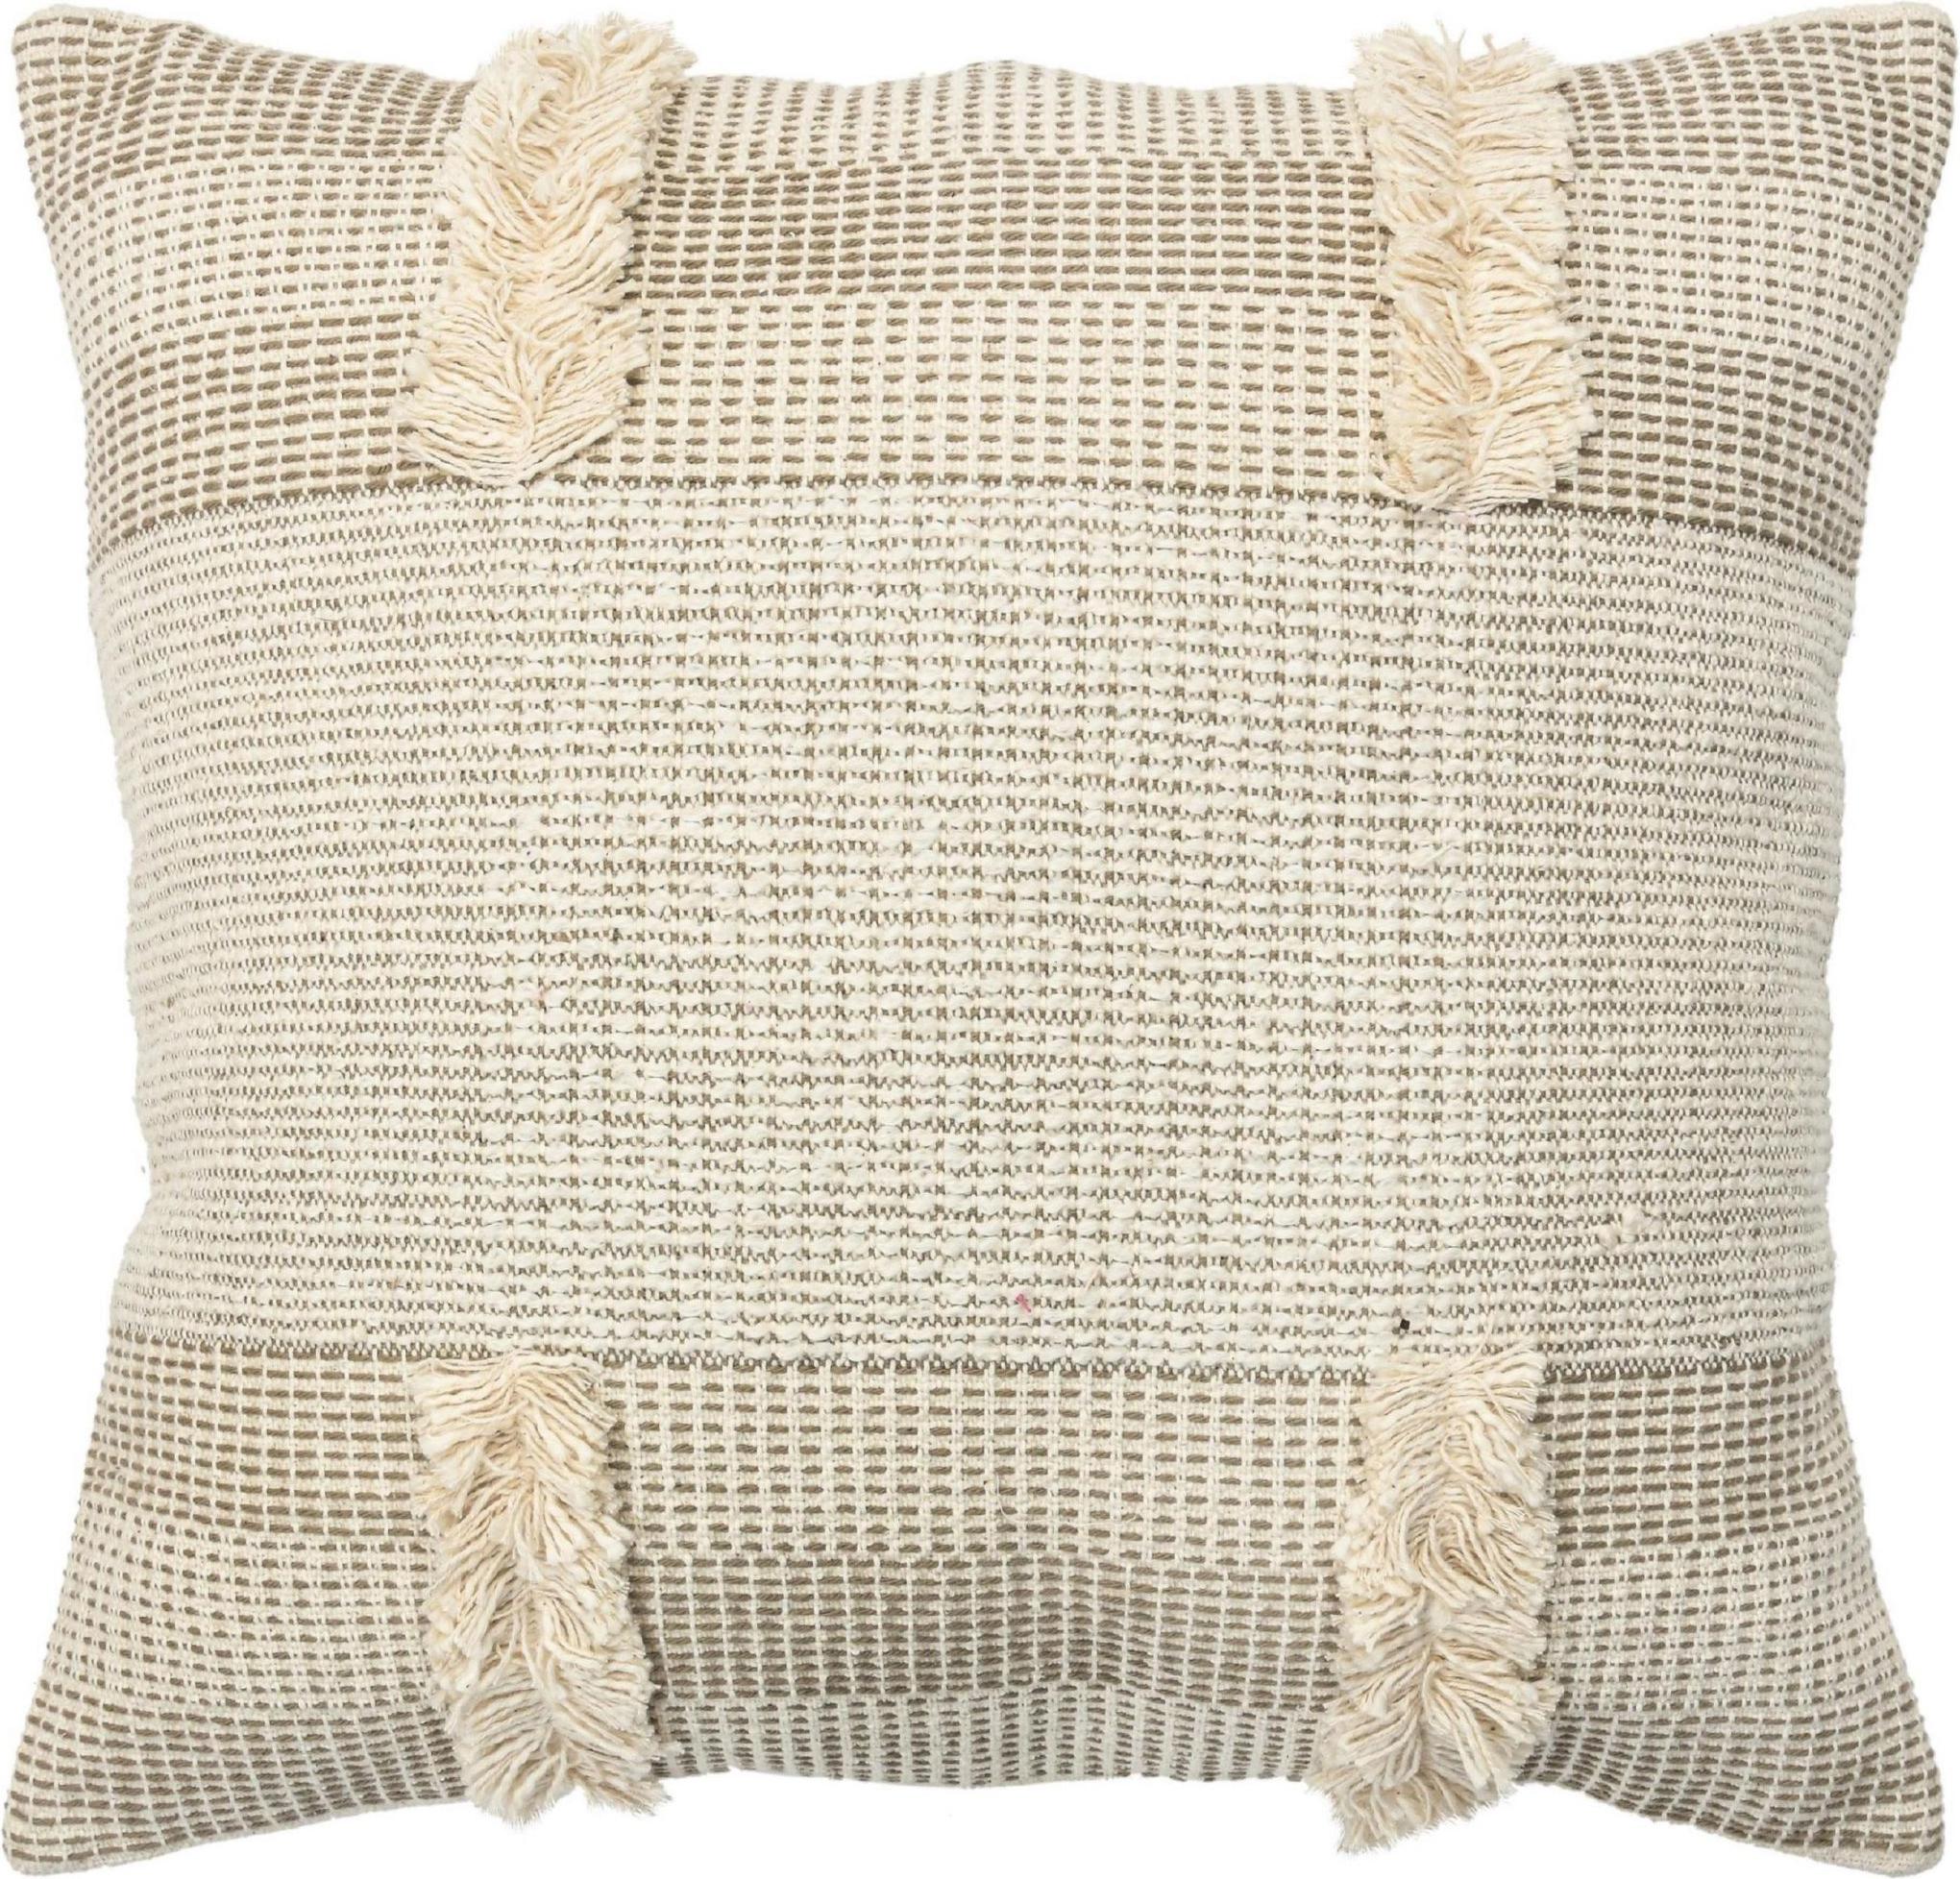 Hand-Knotted Beige Boho Chic Style Contemporary Wool and Cotton Pillow For Sale